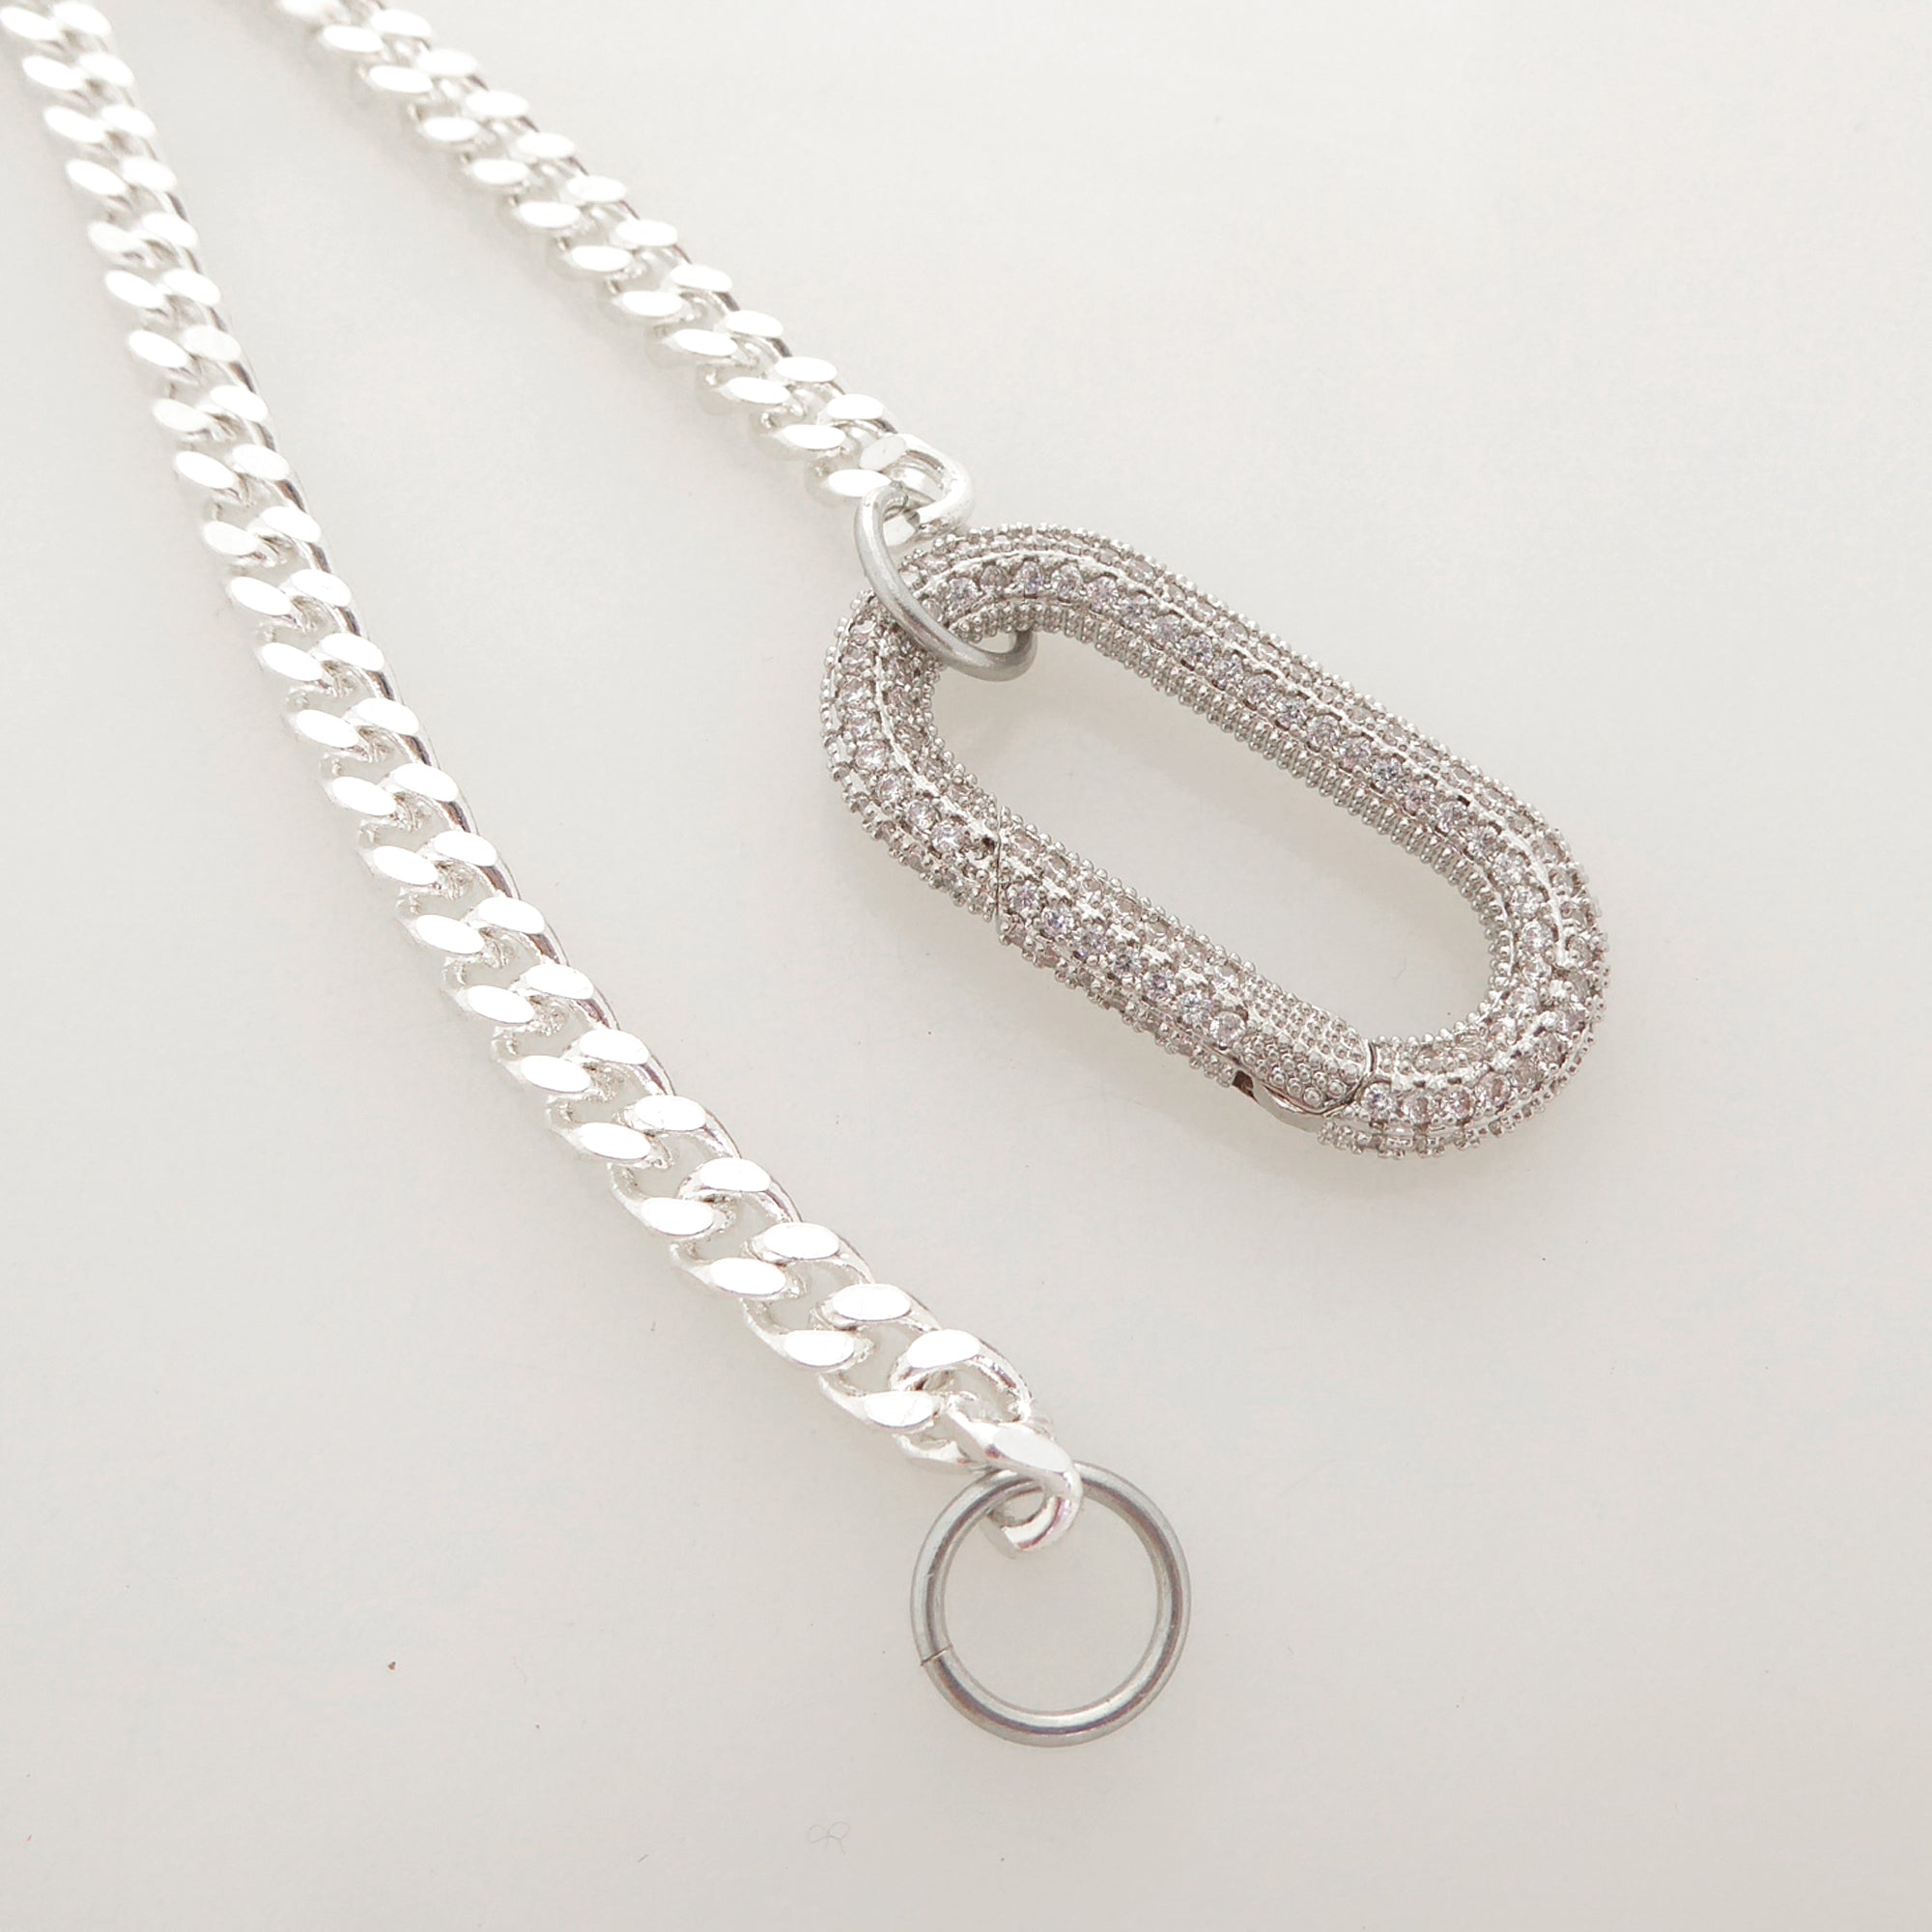 Silver rhinestone carabiner clasp necklace by Jenny Dayco 5